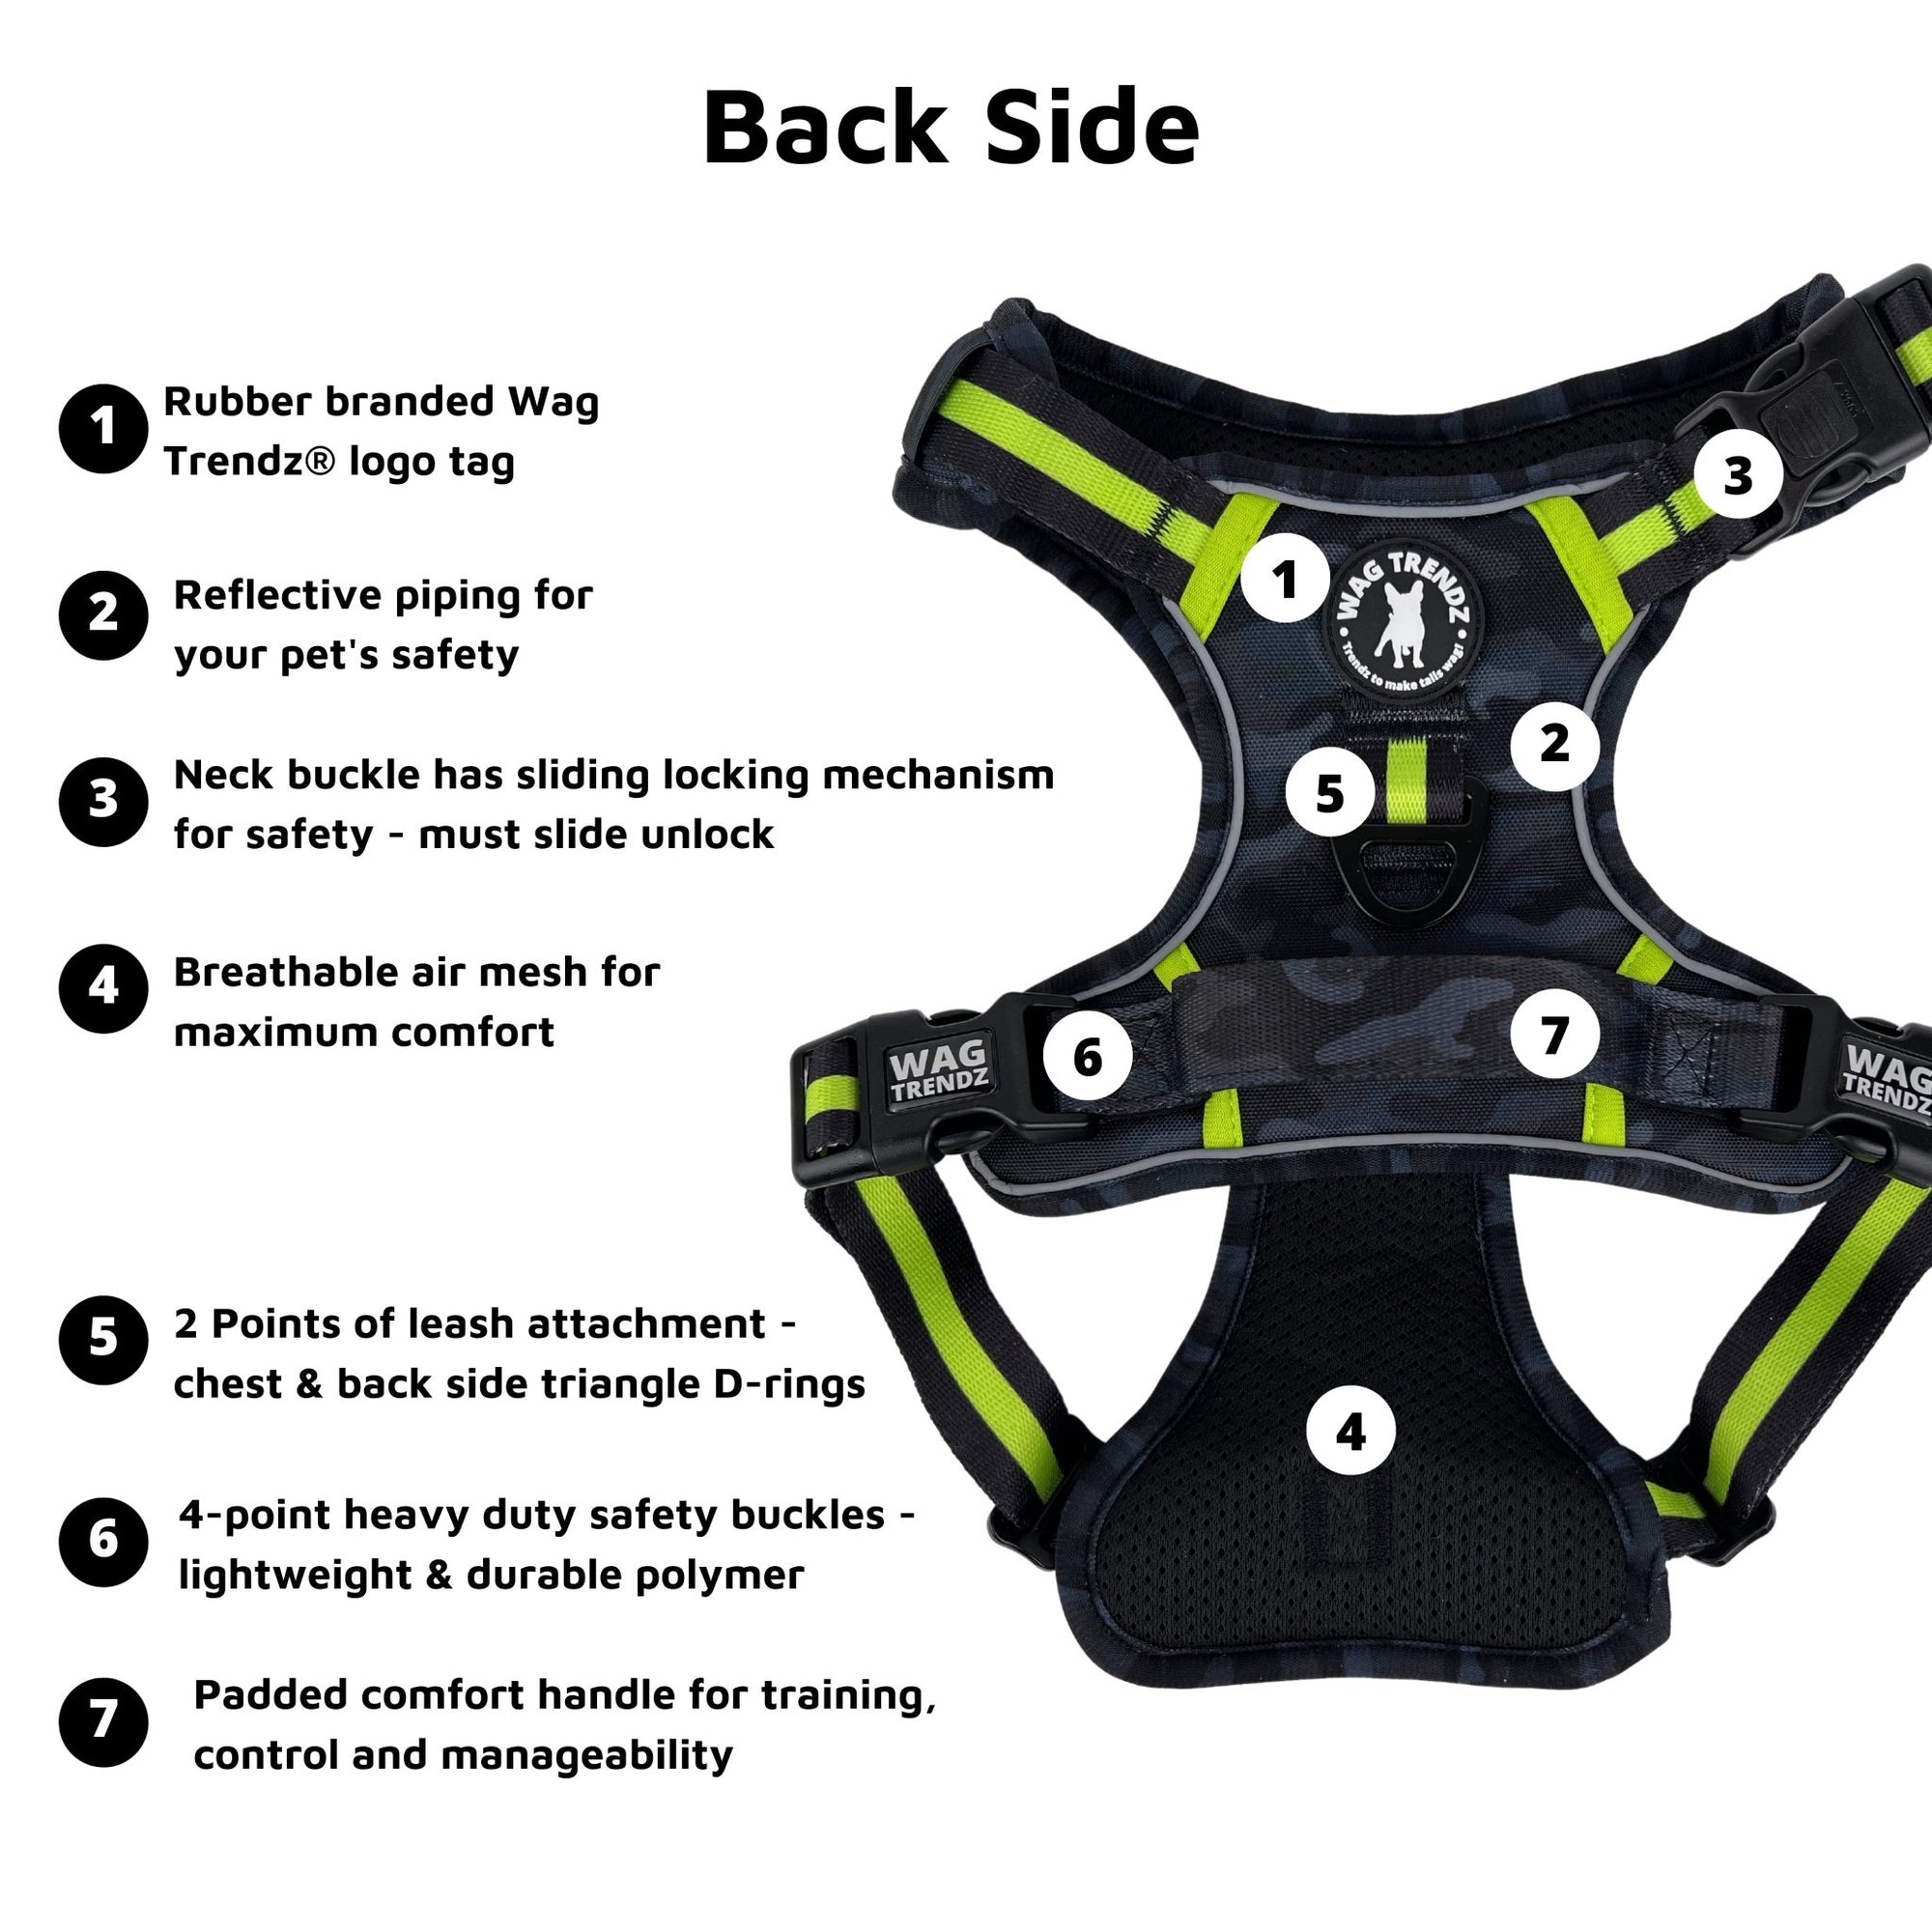 Dog Harness and Leash Set - black and gray camo no pull harness with hi vis accents - back view - against solid white background - Wag Trendz